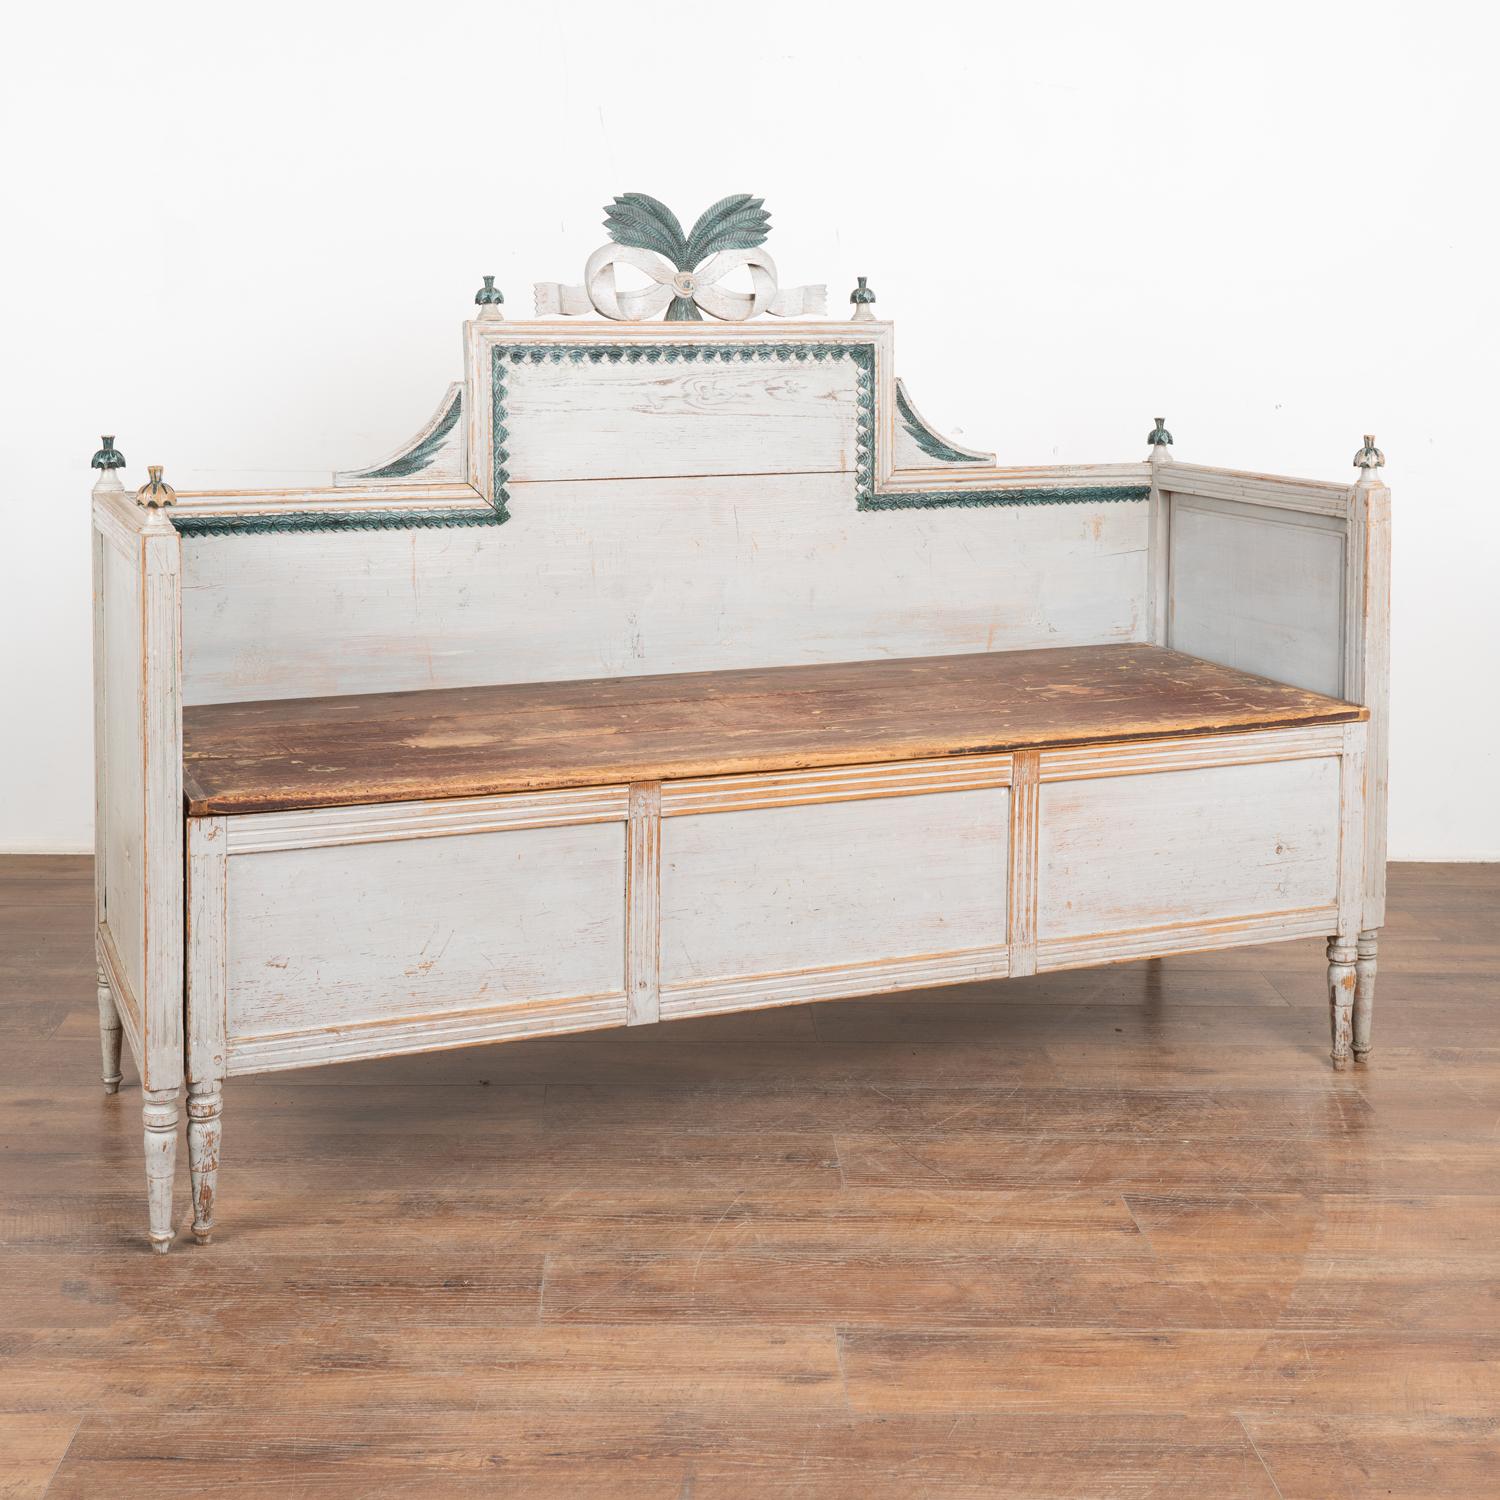 This exceptional Gustavian bench is a special find. Note the original pale gray painted finish (with blue undertones) with decorative finials and carved bow in teal blue/green. The finials, feet, and decorative carved details of the back are all